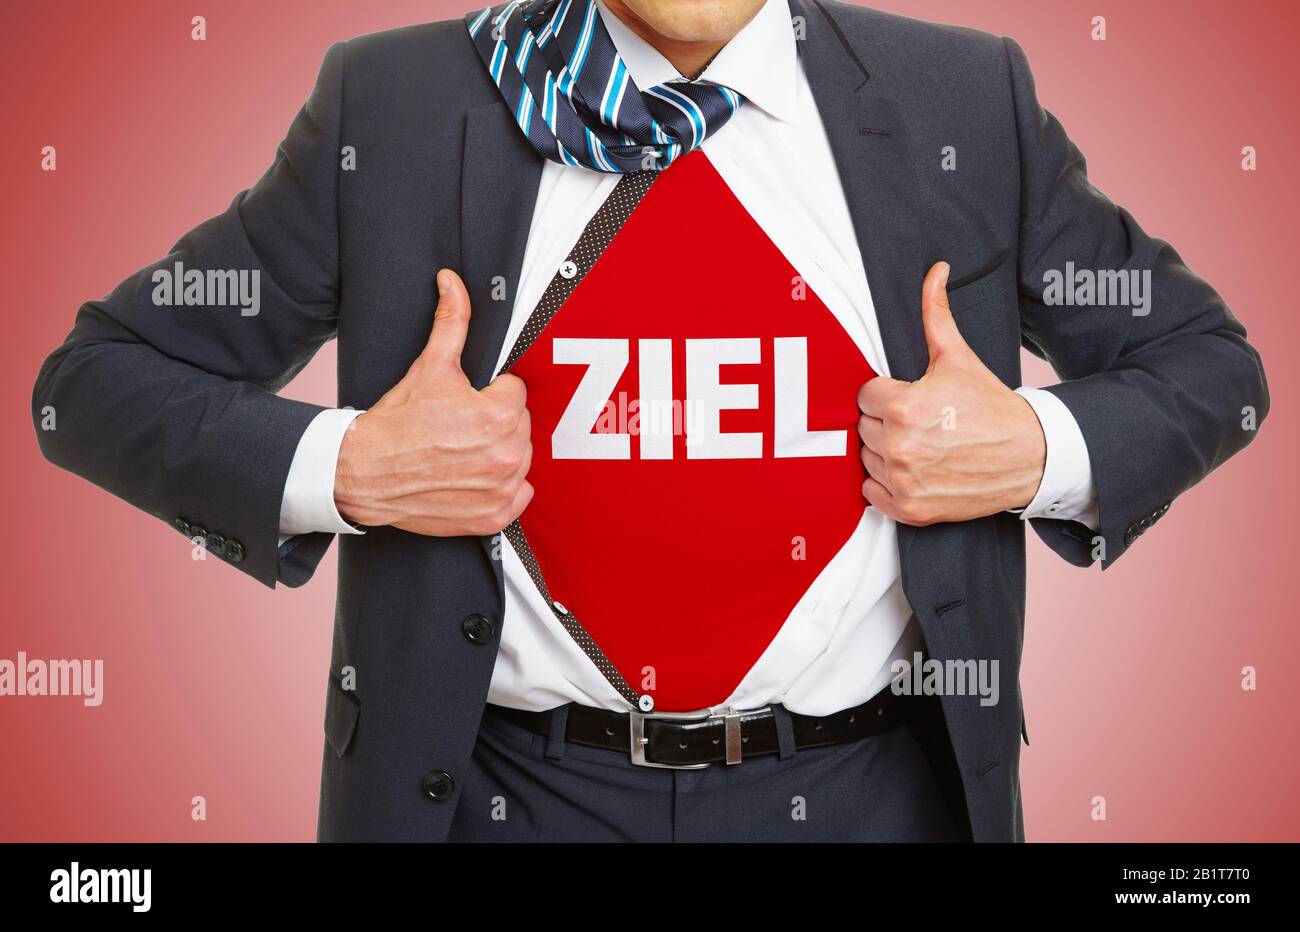 Man in suit opens shirt and carries lettering 'Ziel' (German for: target) underneath as vision and success concept Stock Photo